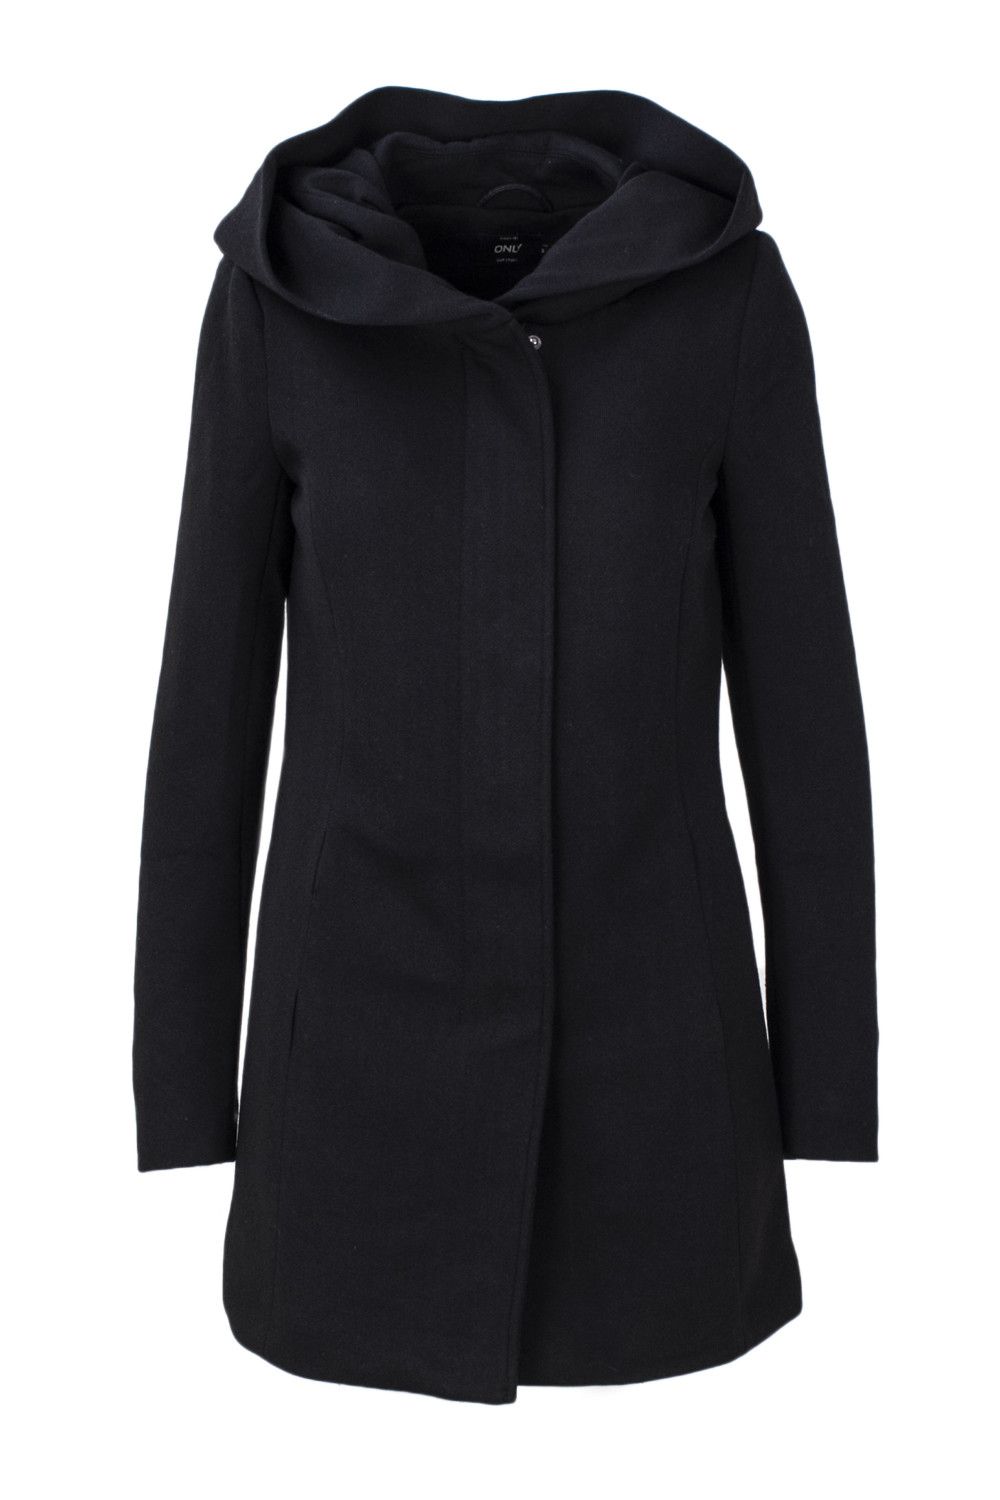 Brand: Only   Gender: Women   Type: Coats   Color: Black   Sleeves: Long Sleeve   Collar: Hood   Fastening: With Zip   Season: Fall/winter . length:long. style:zipper. material:cotton. type:trench-coat. hood:hood